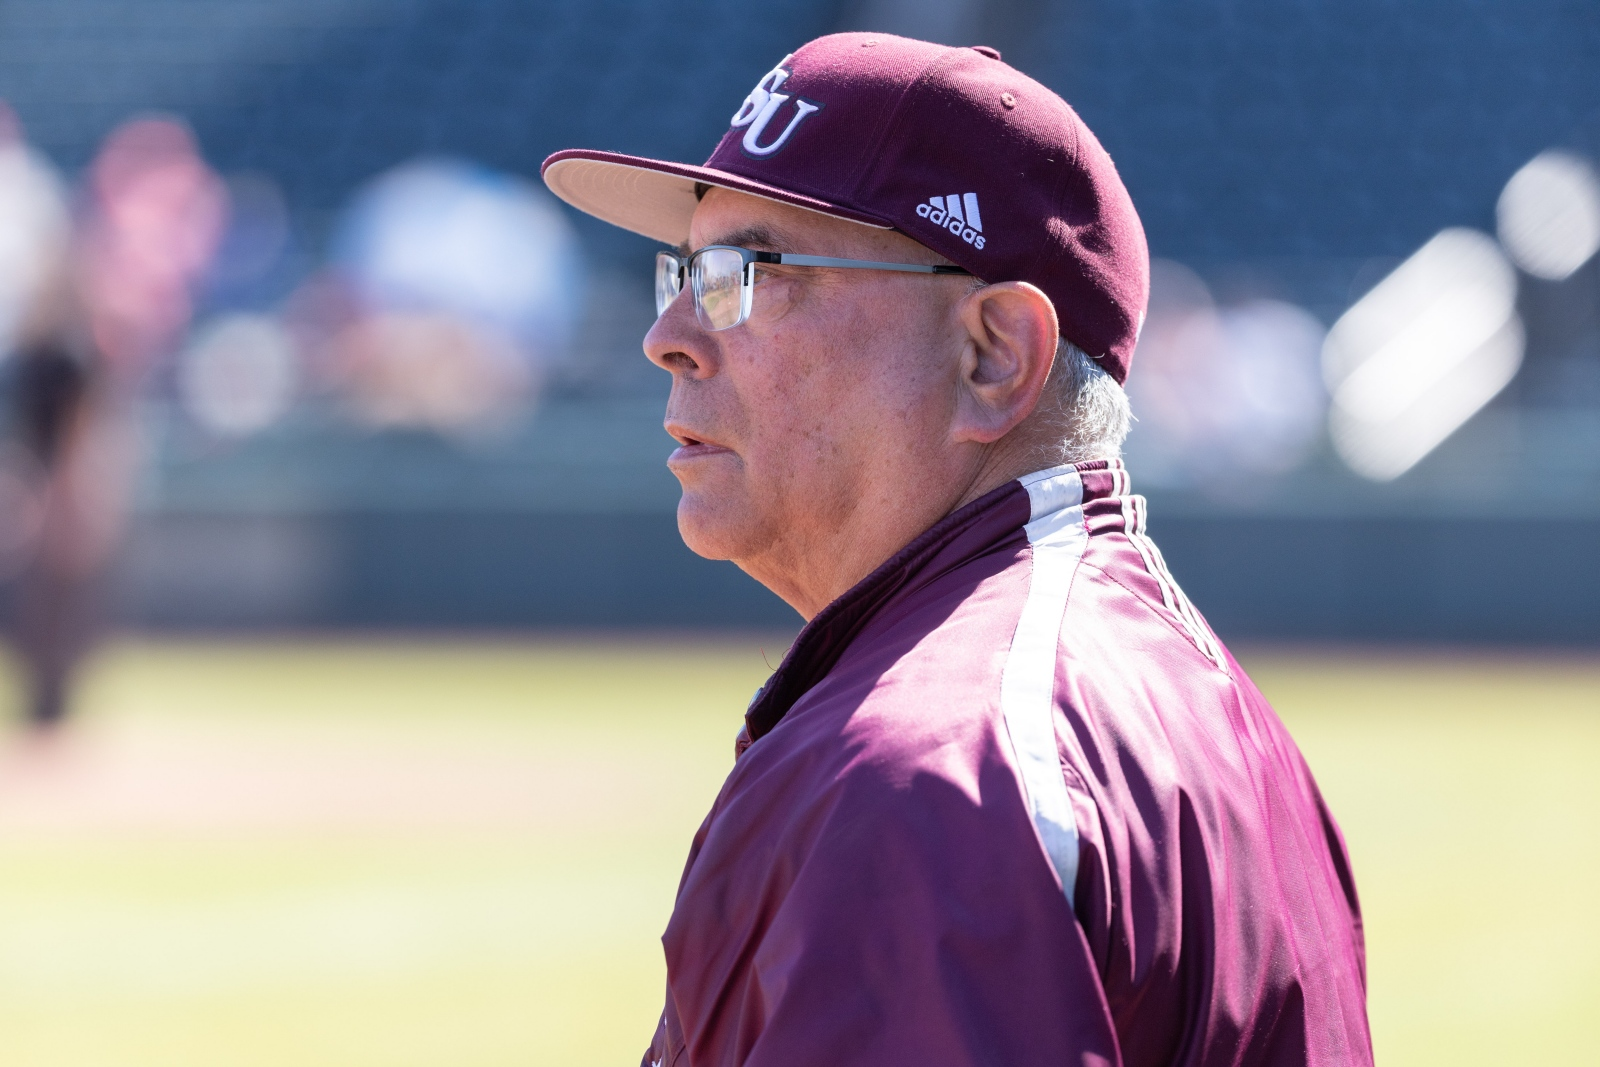 Missouri State baseball coach Keith Guttin watches his team play a game at Hammons Field